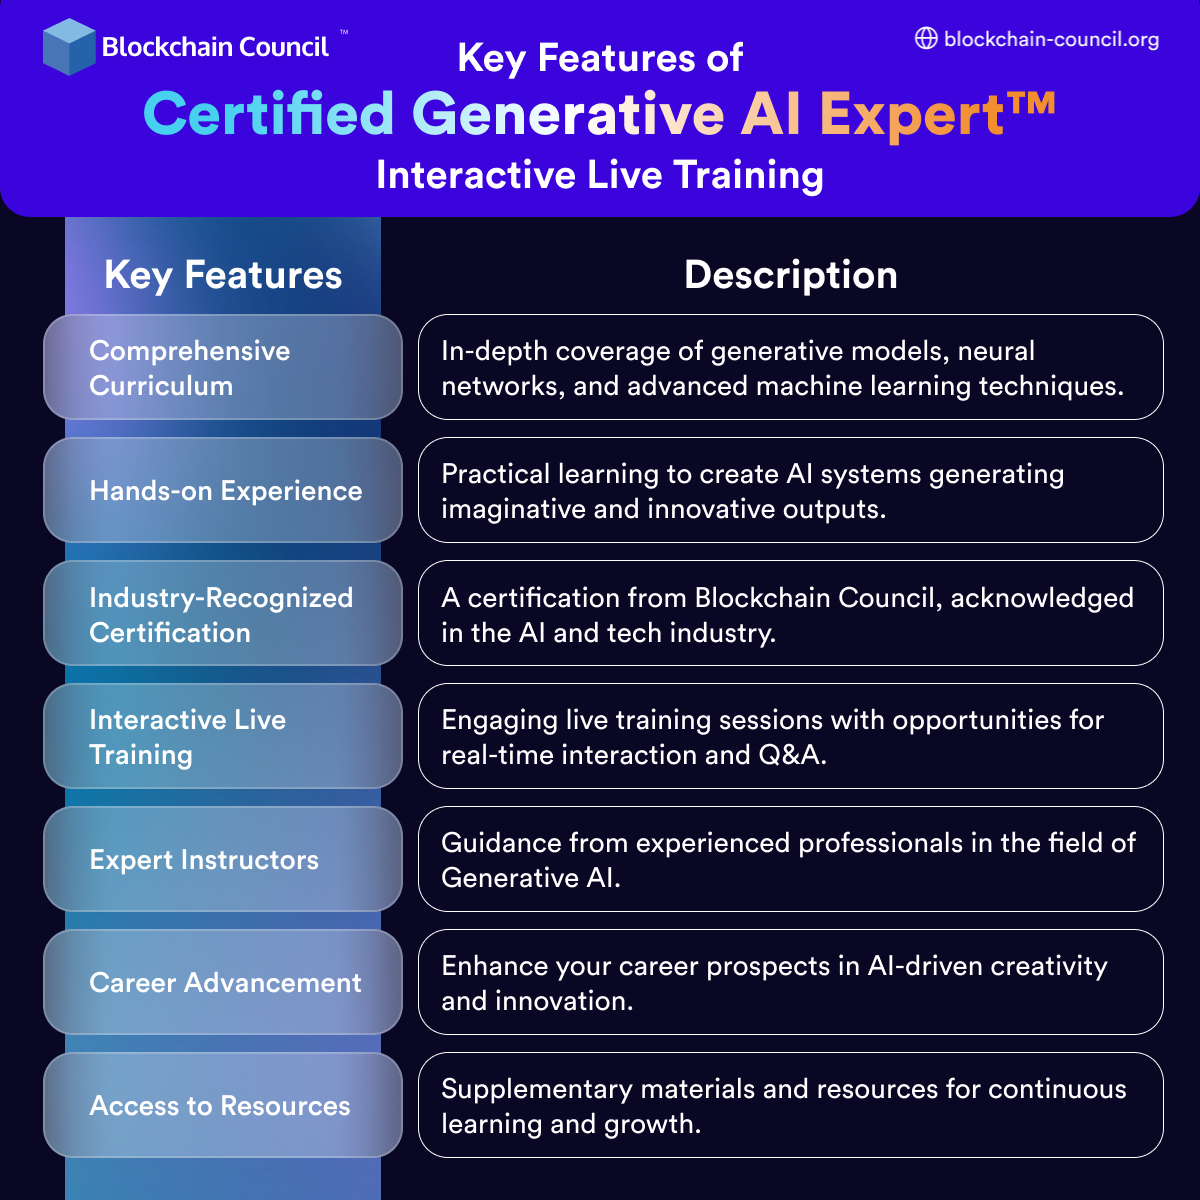 Key Features of Certified Generative AI Expert™ Interactive Live Training